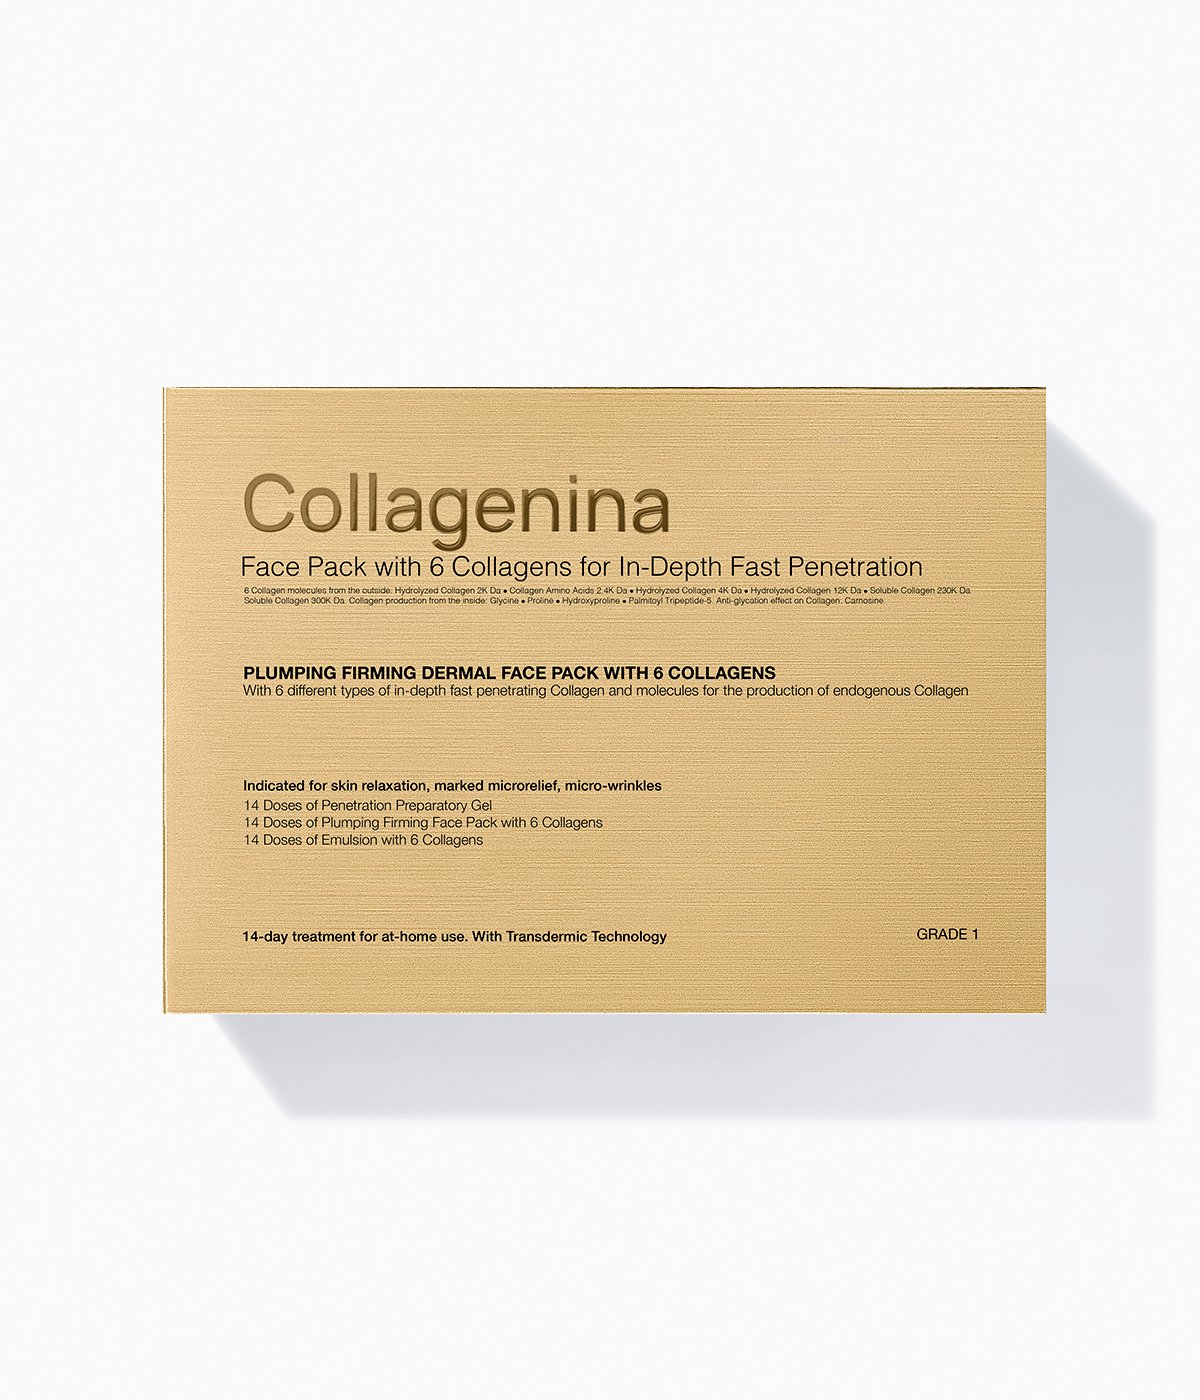 Collagenina Face Pack with 6 Collagens for In-Depth Fast Penetration